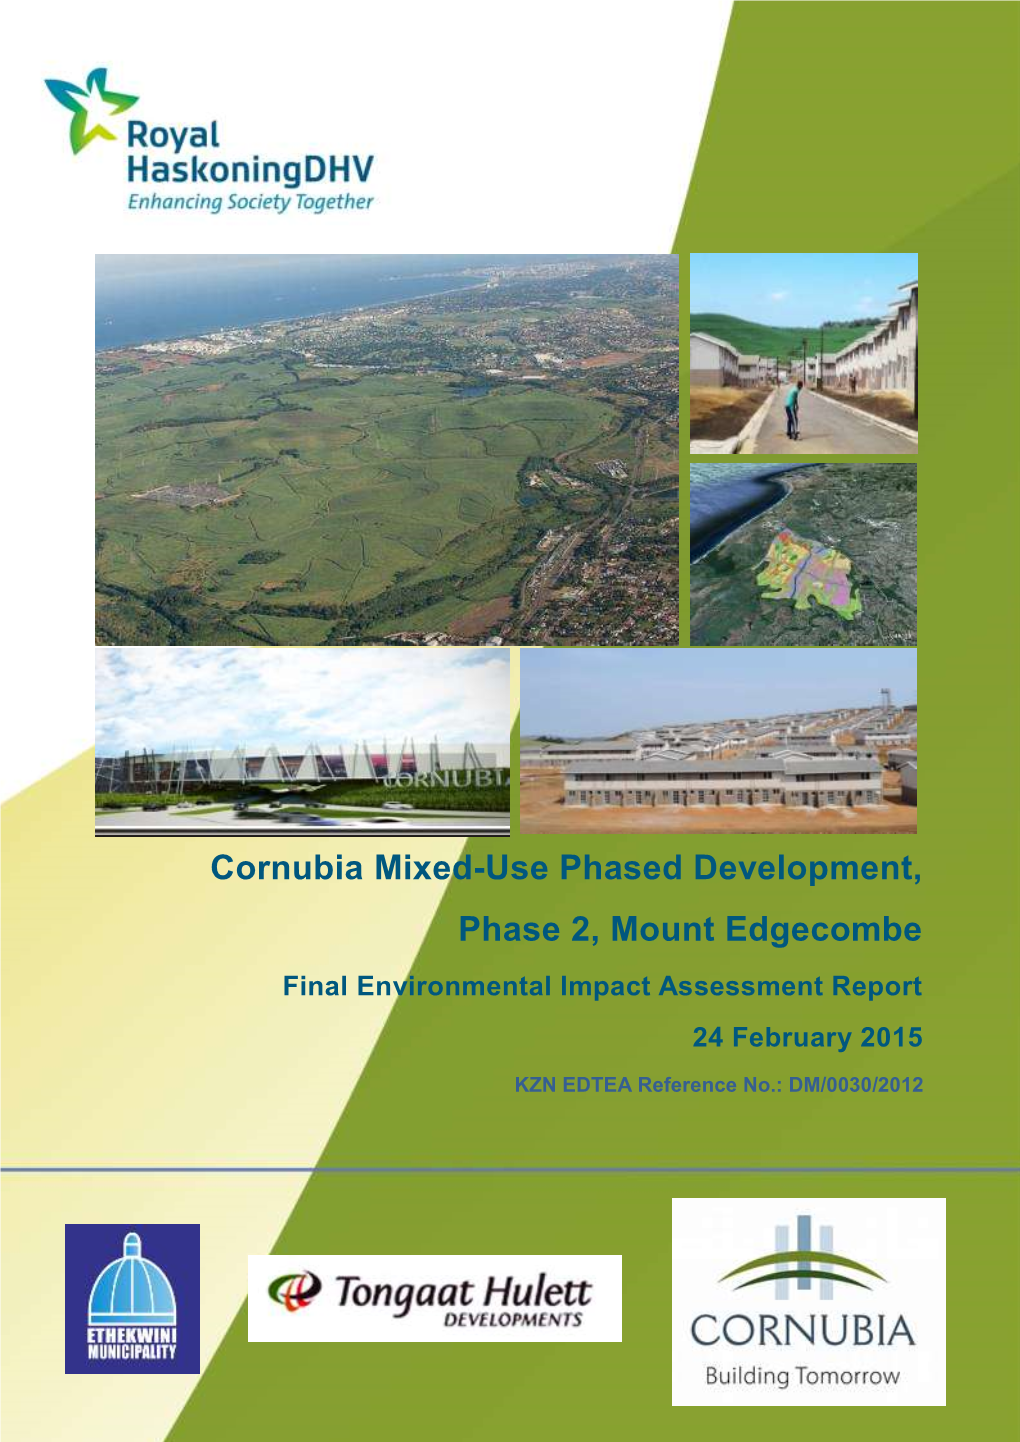 Cornubia Mixed-Use Phased Development, Phase 2, Mount Edgecombe Final Environmental Impact Assessment Report 24 February 2015